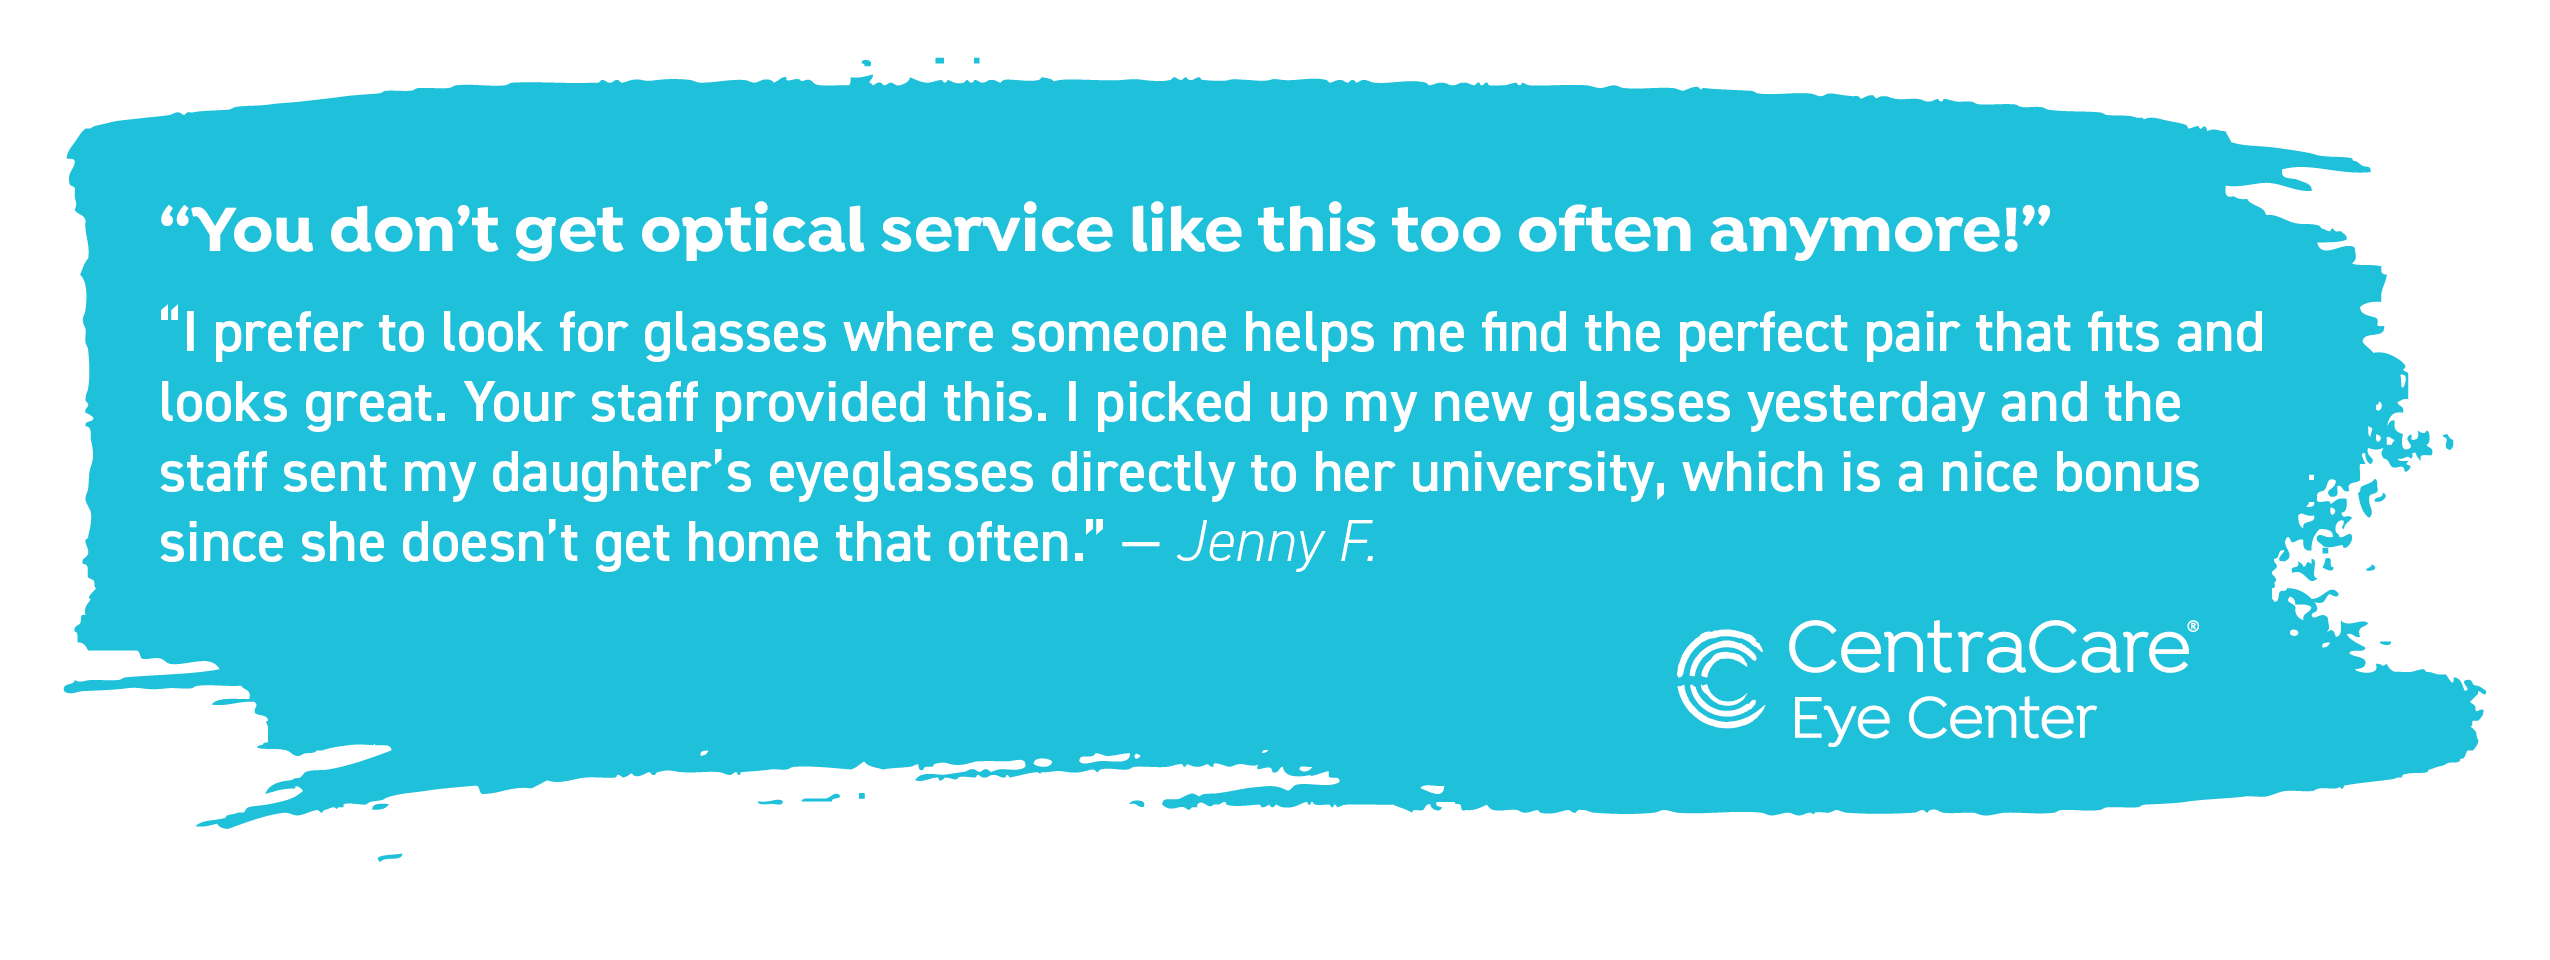 Customer Jenny F. states, "You don't get optical service like this too often anymore! I prefer to look for glasses where someone helps me find the perfect pair that fits and looks great. Your staff provided this. I picked up my new glasses yesterday and the staff sent my daughter's eyeglasses directly to her university, which is a nice bonus since she doesn't get home that often."